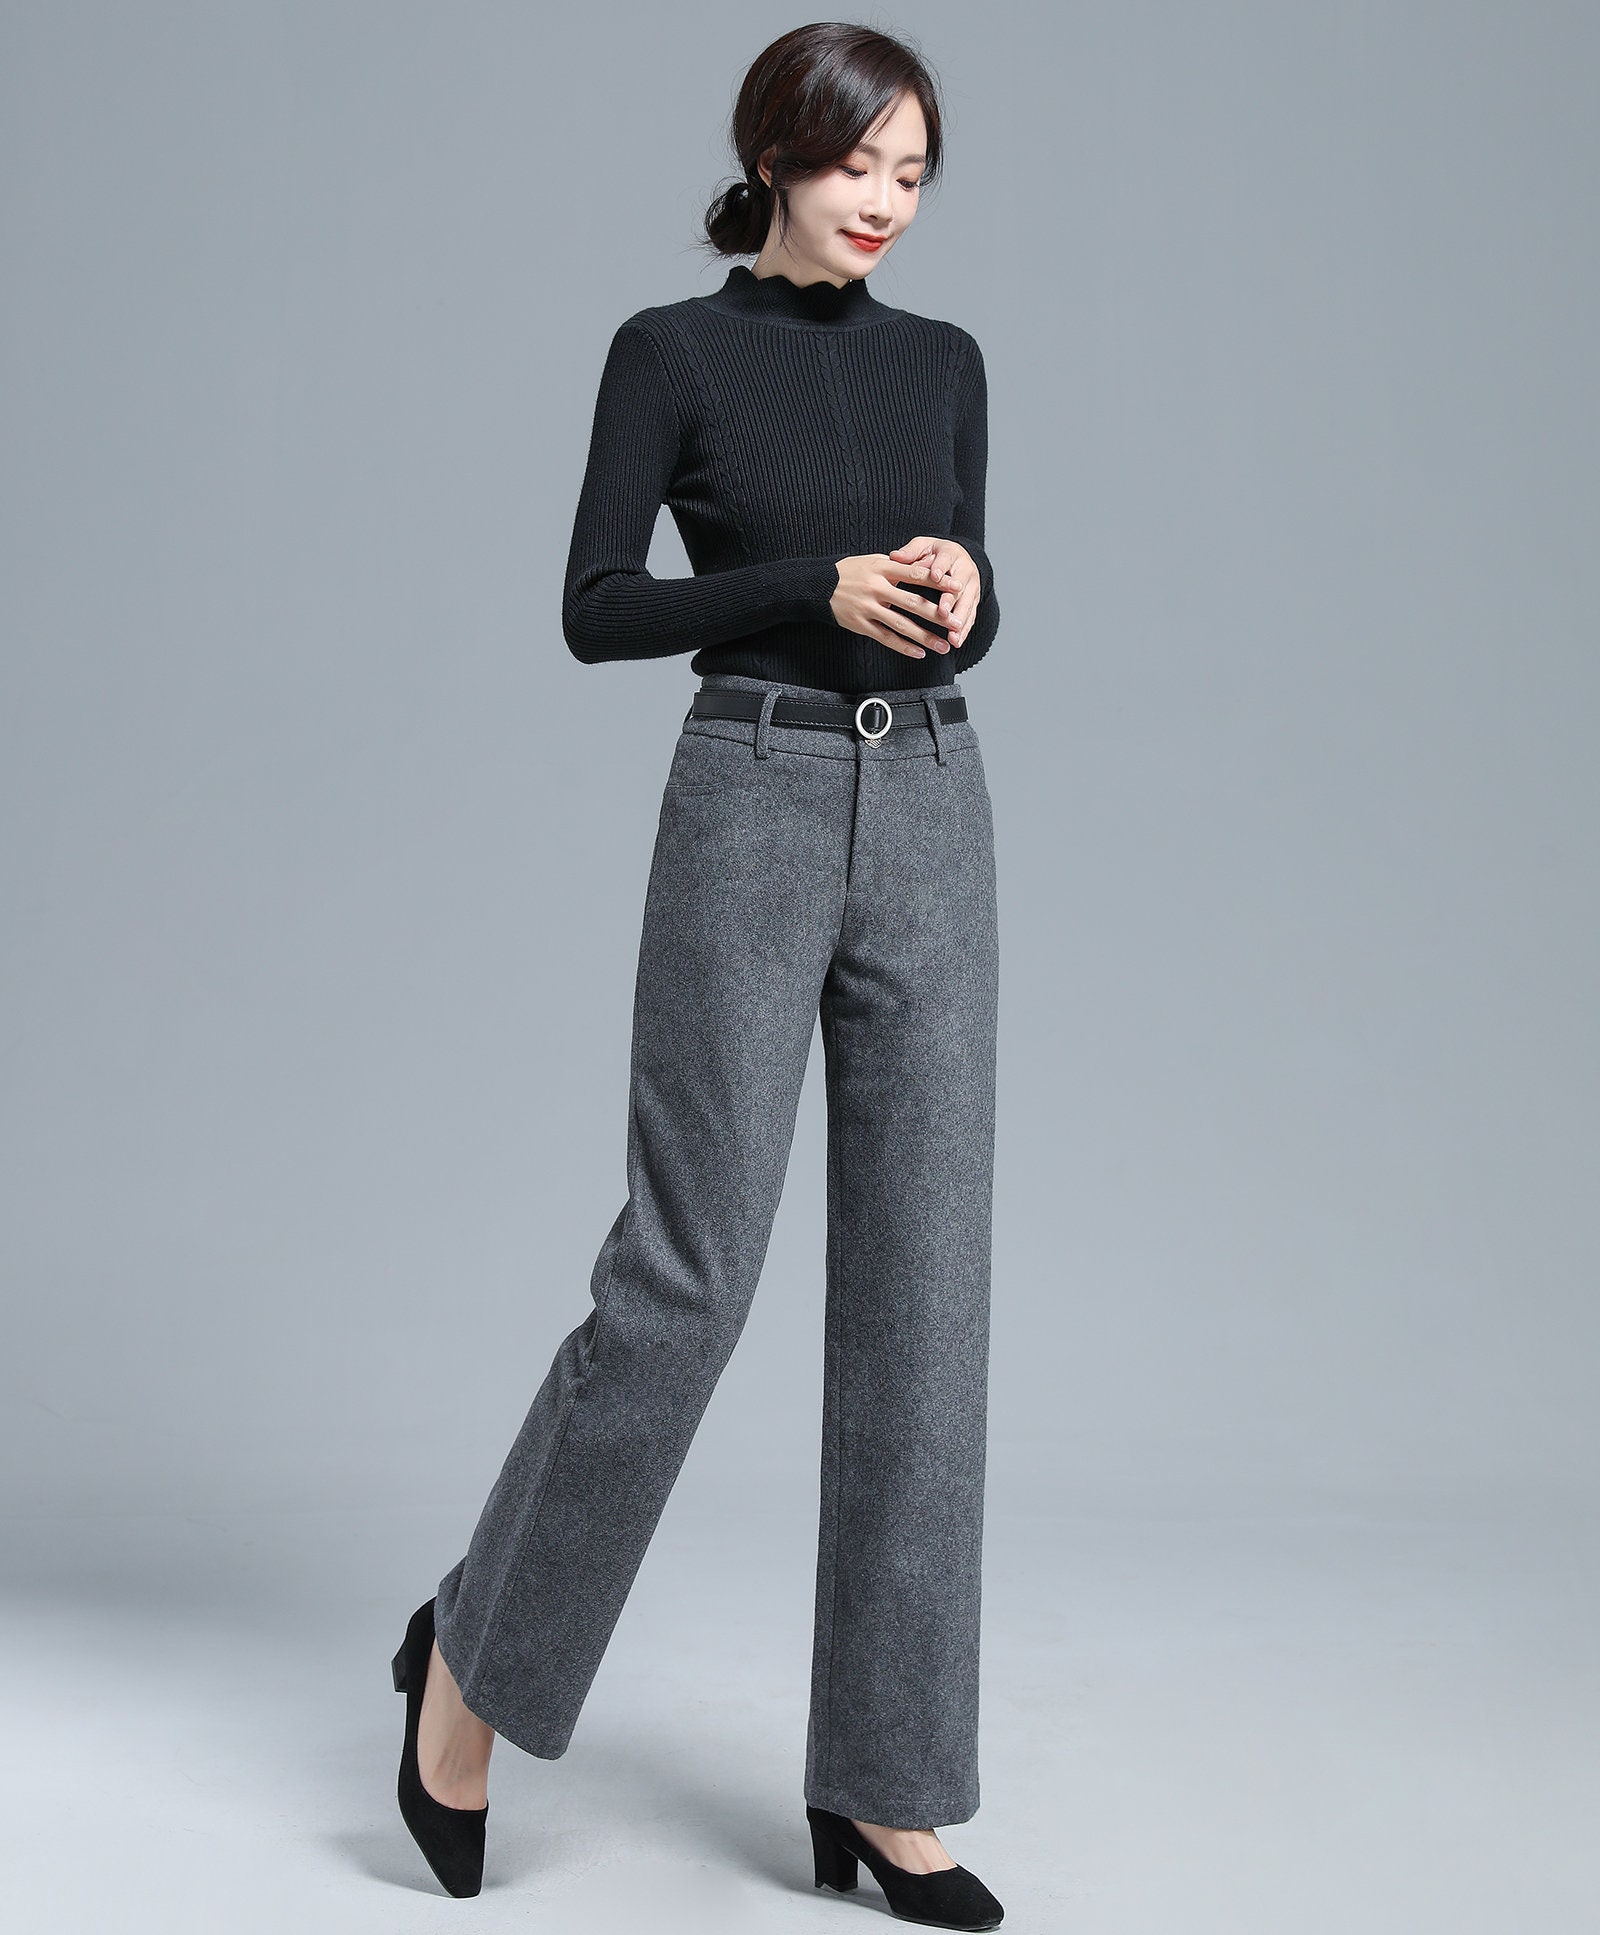 High Waisted Light Wash Pleated Wide Leg Jeans